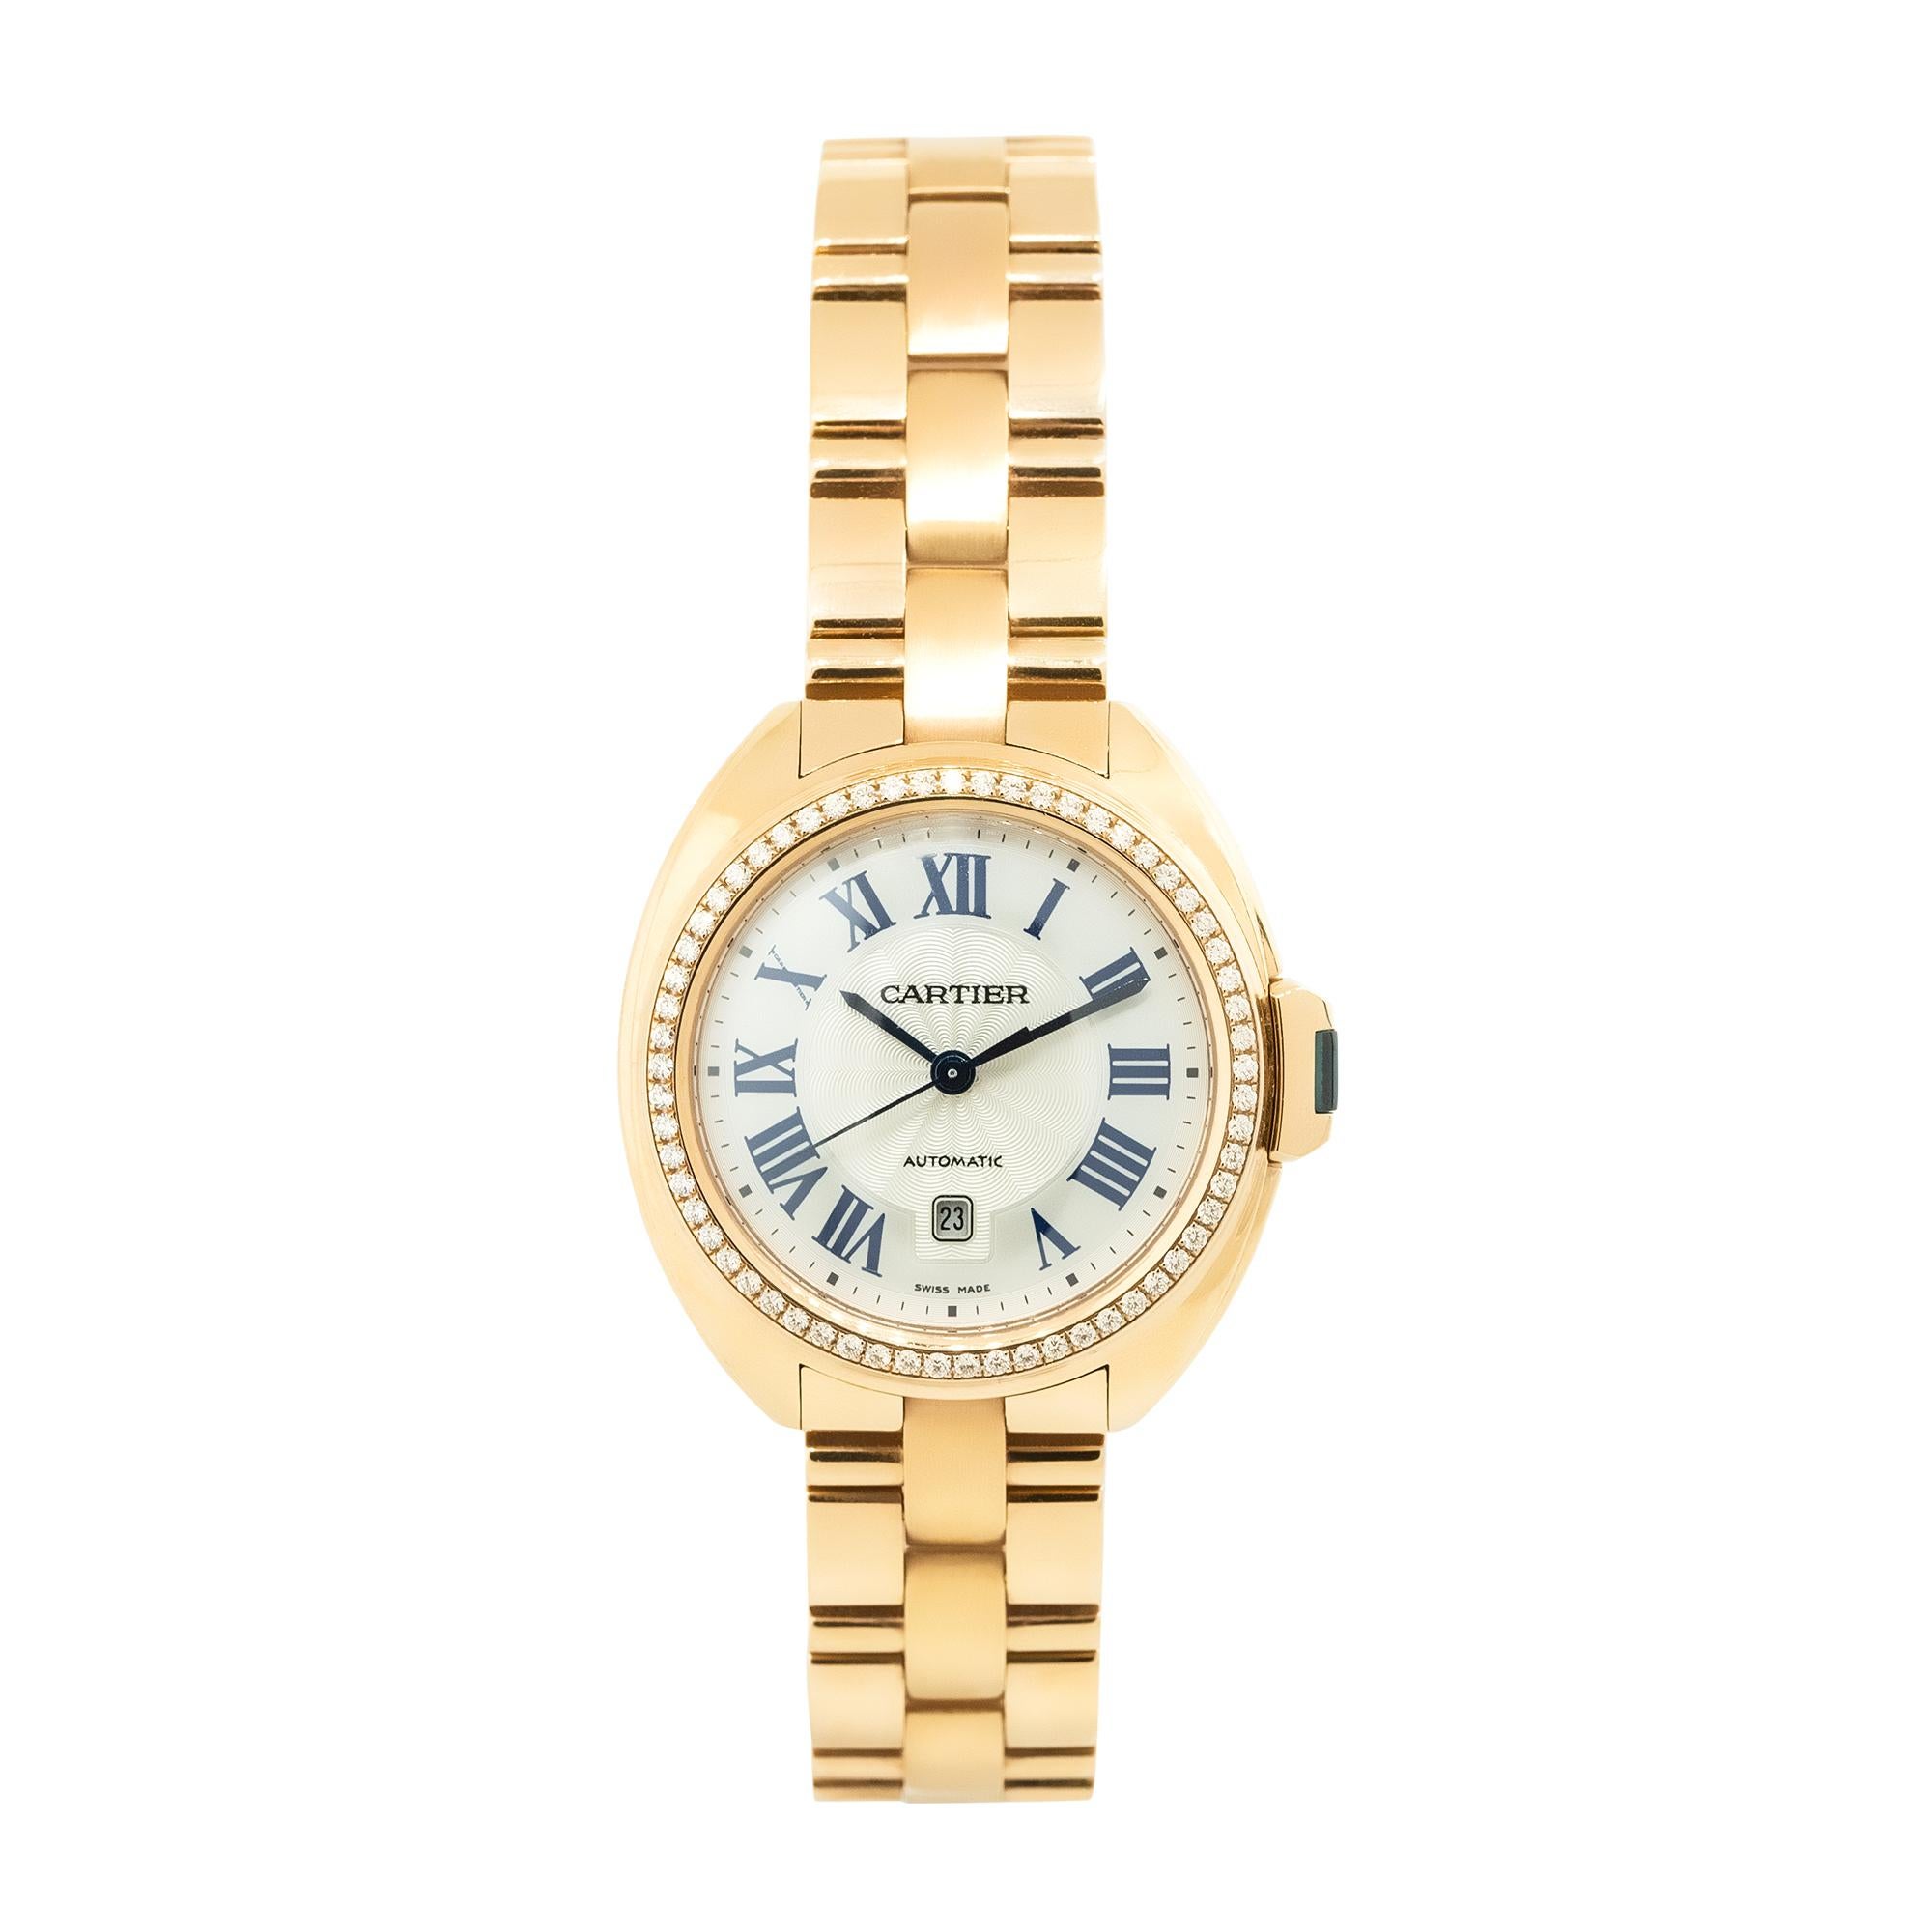 Brand: Cartier
Model: Clé de Cartier
Case Material: 18k Yellow Gold
Case Diameter: 35mm
Dial: Off-White Roman Dial
Bezel: Diamond Bezel
Bracelet: 18k Yellow Gold
Crystal: Sapphire Crystal
Movement: Automatic
Reference Number: WFCL0003
Size: Will fit